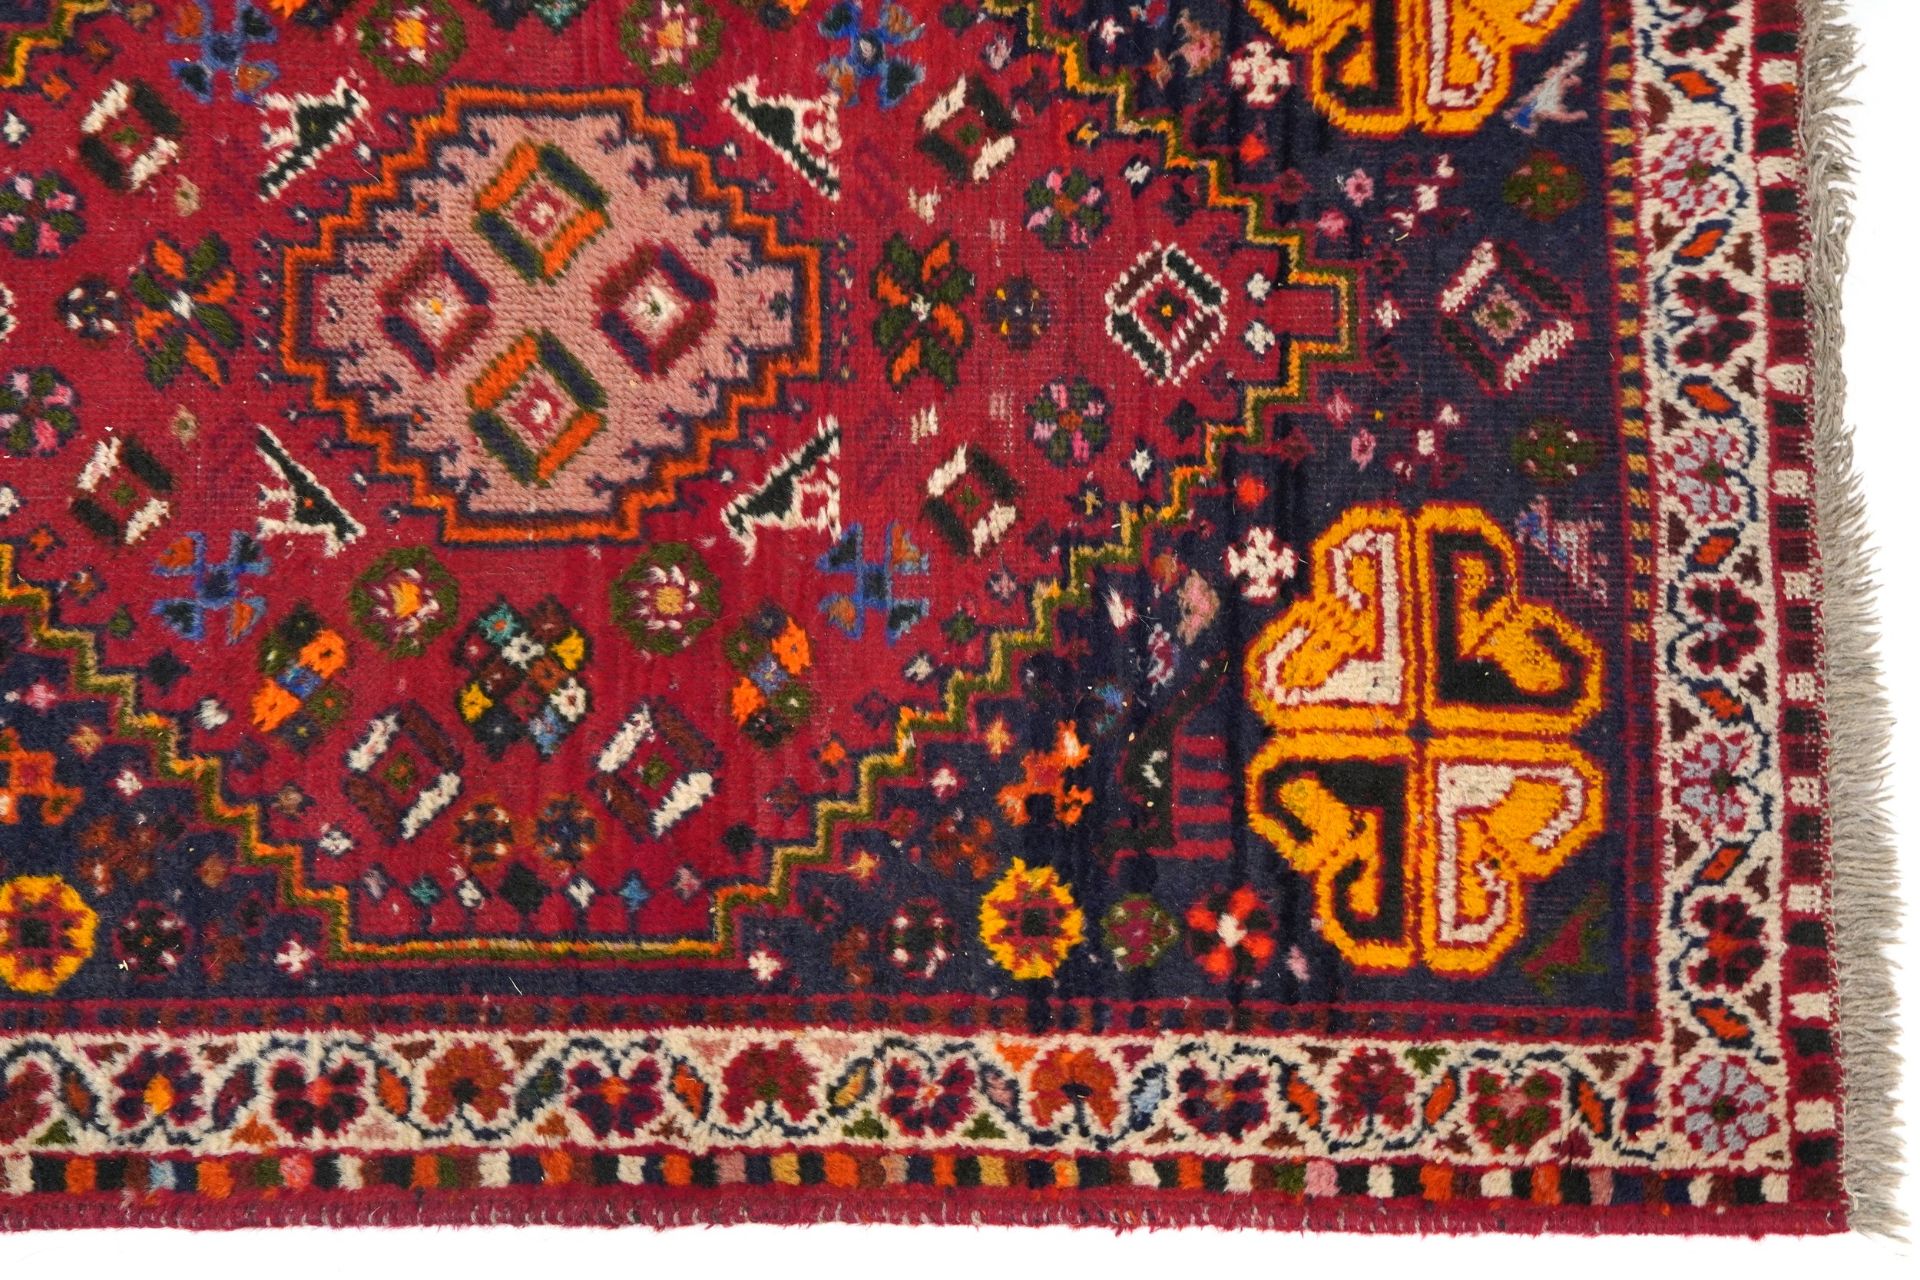 Rectangular red and blue ground rug having and allover geometric and animal design, 145cm x 102cm - Image 5 of 6